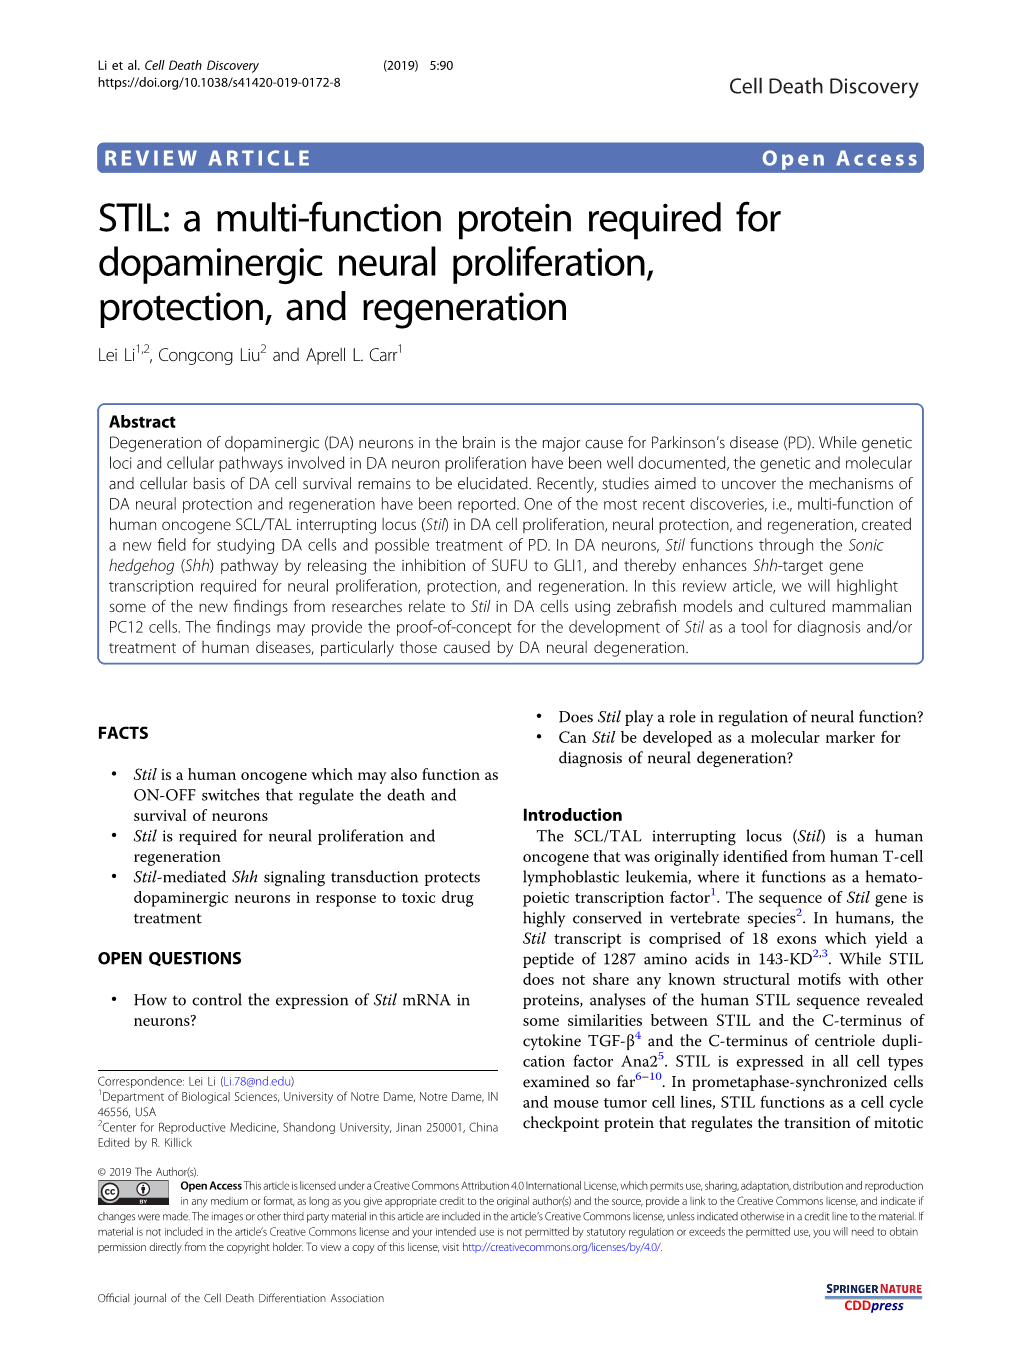 STIL: a Multi-Function Protein Required for Dopaminergic Neural Proliferation, Protection, and Regeneration Lei Li1,2, Congcong Liu2 and Aprell L